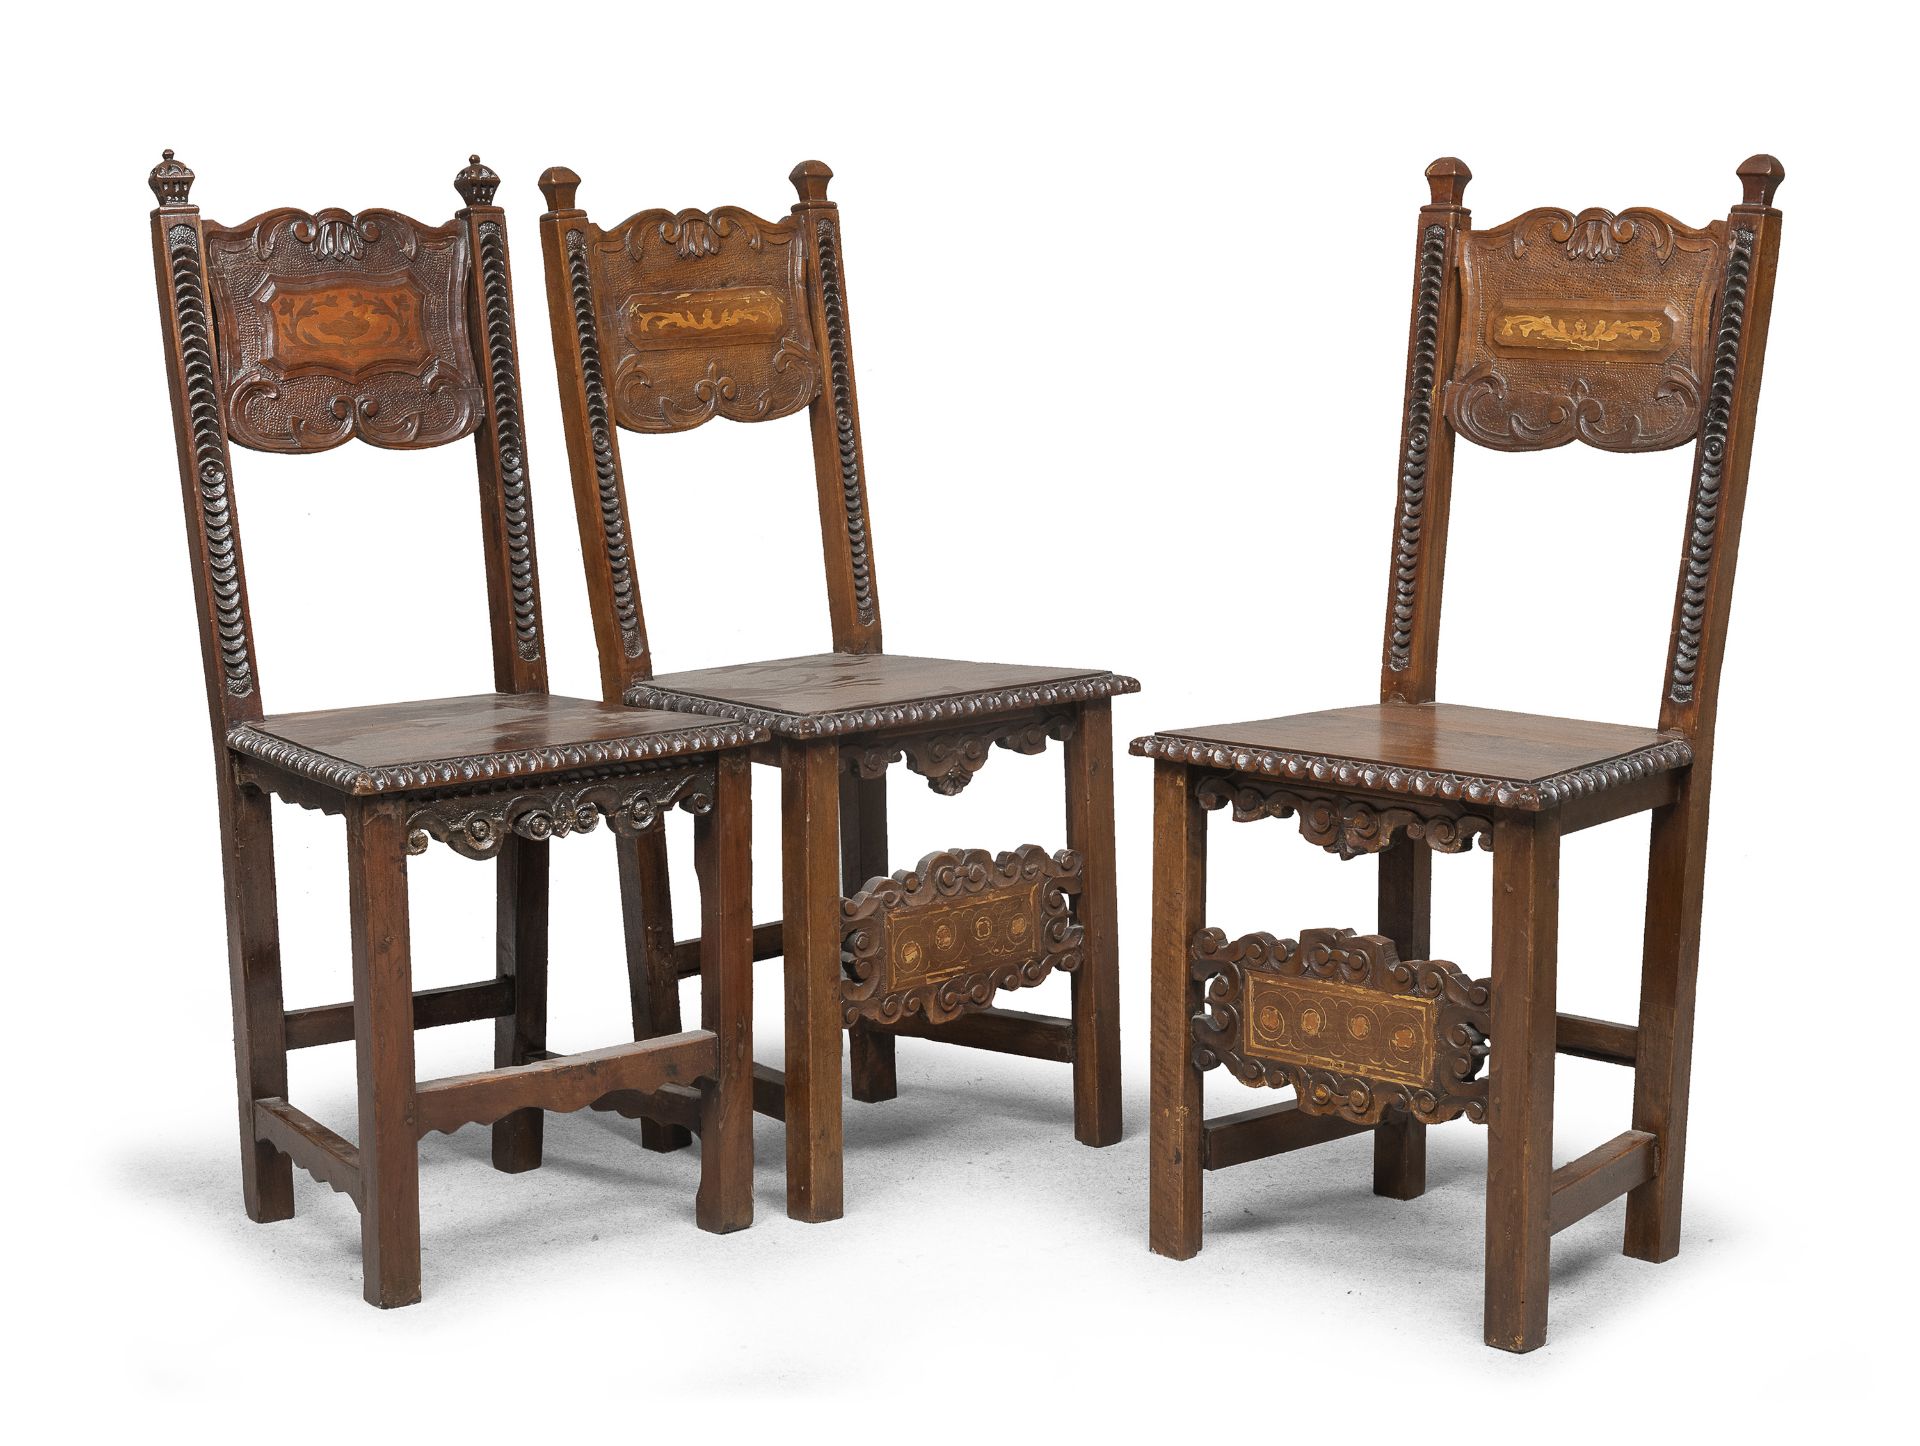 THREE CHAIRS RENAISSANCE STYLE END OF THE 19TH CENTURY